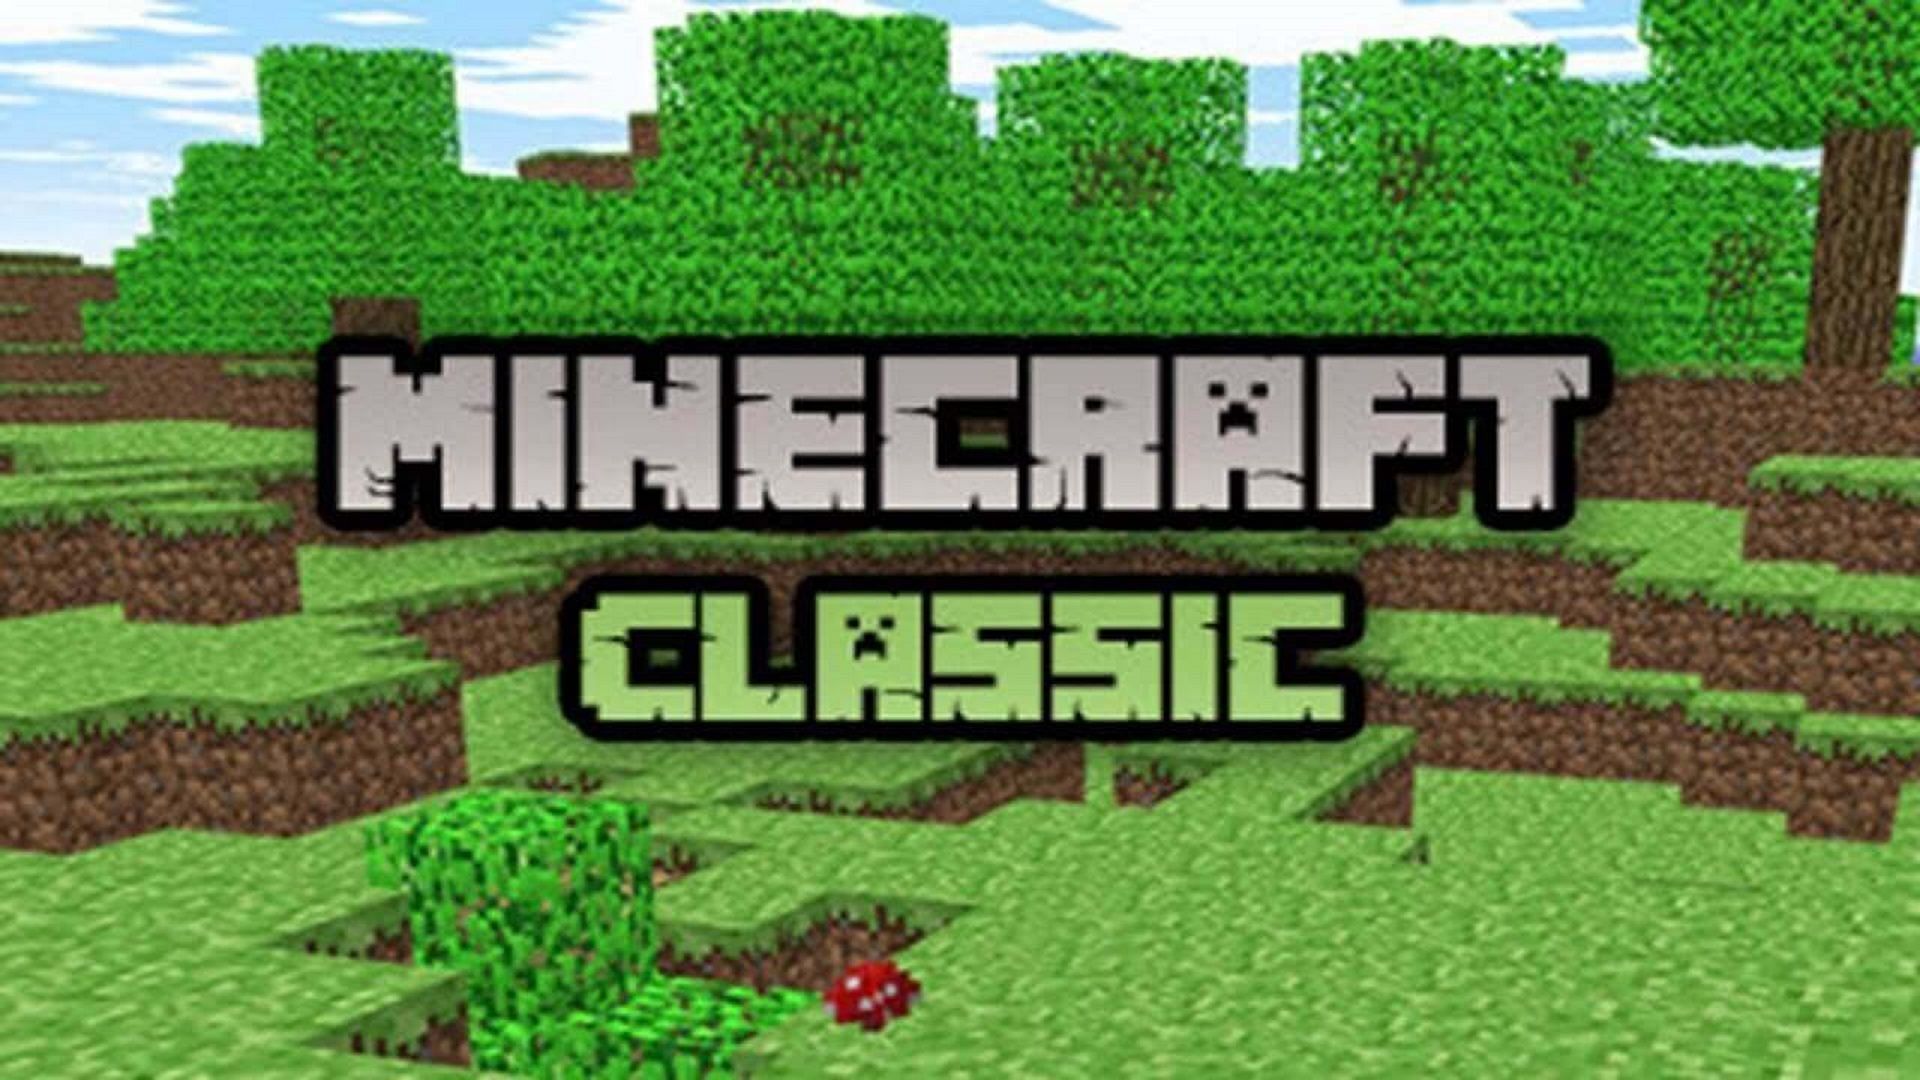 Mojang launches 'Minecraft Classic' for web browsers